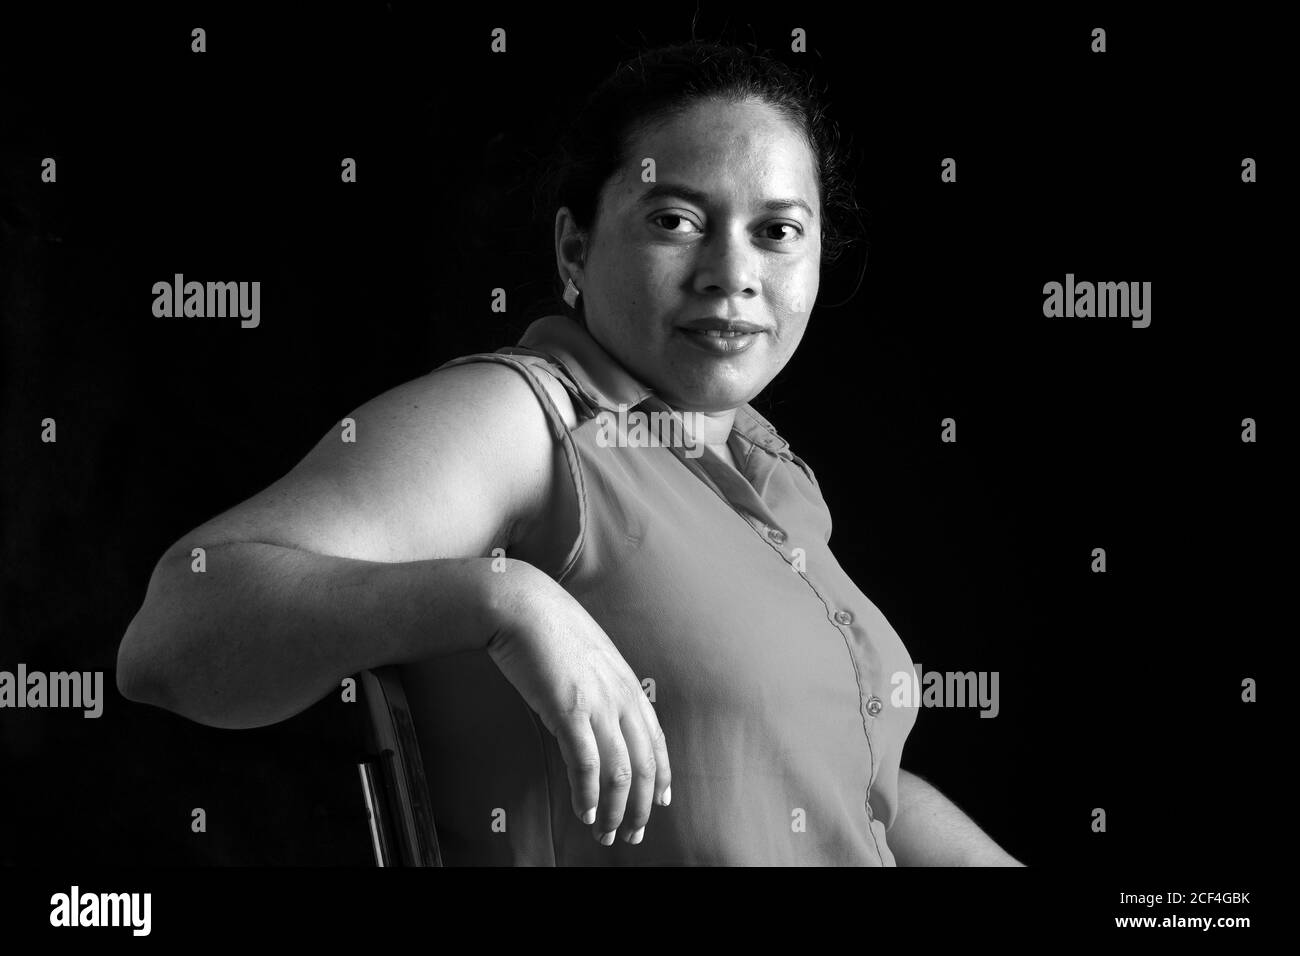 portrait of a latin woman sitting on chair and looking at camera on black background, black and white Stock Photo